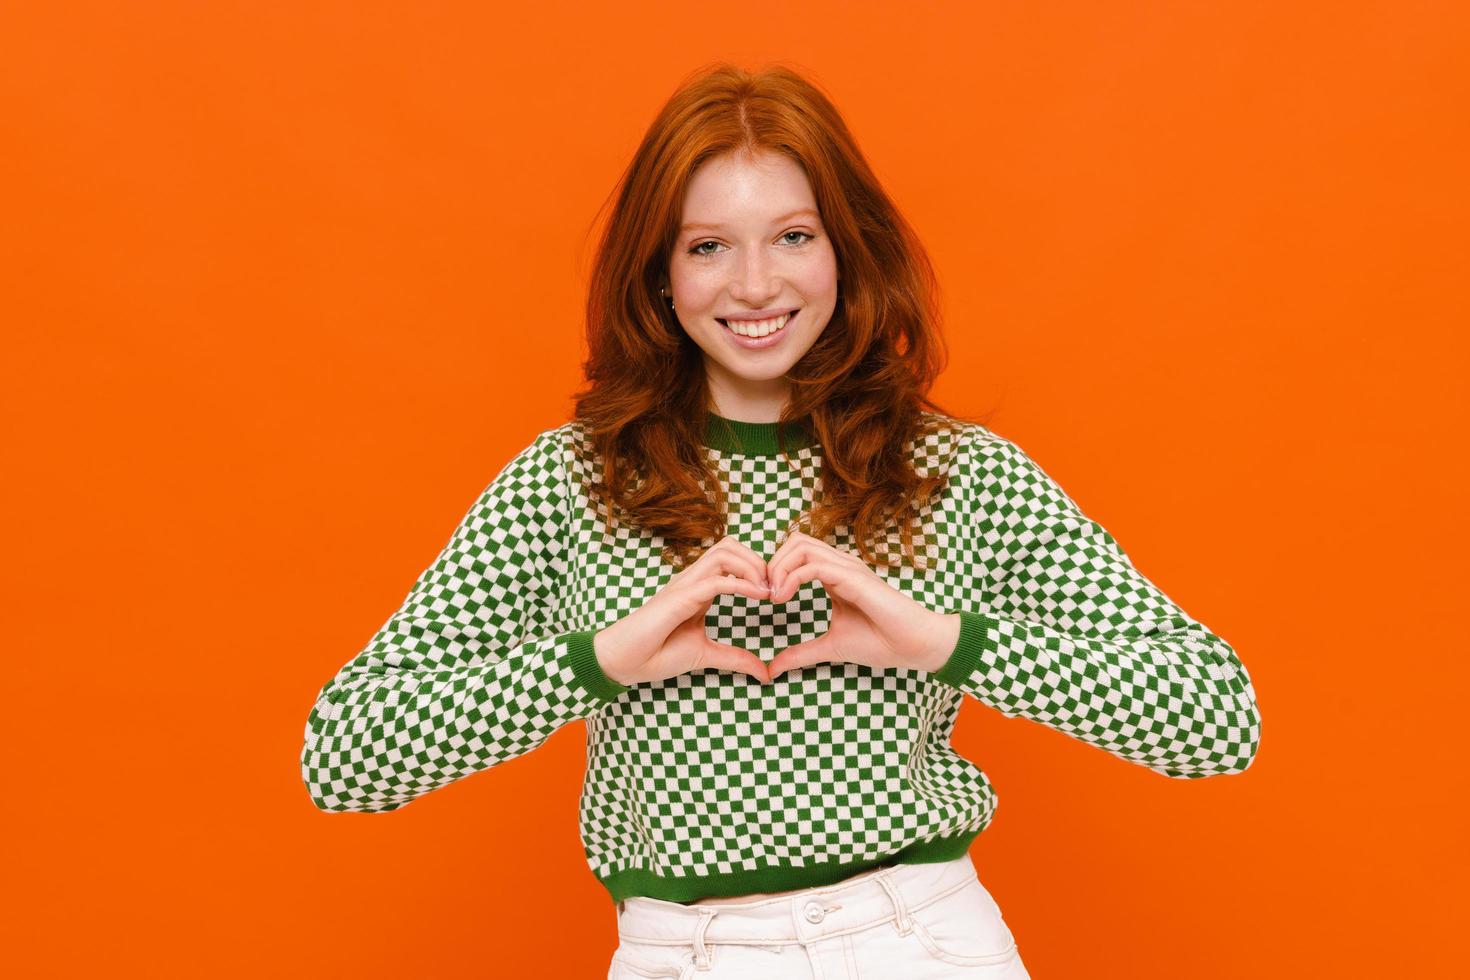 Ginger woman in plaid sweater smiling and showing heart gesture photo